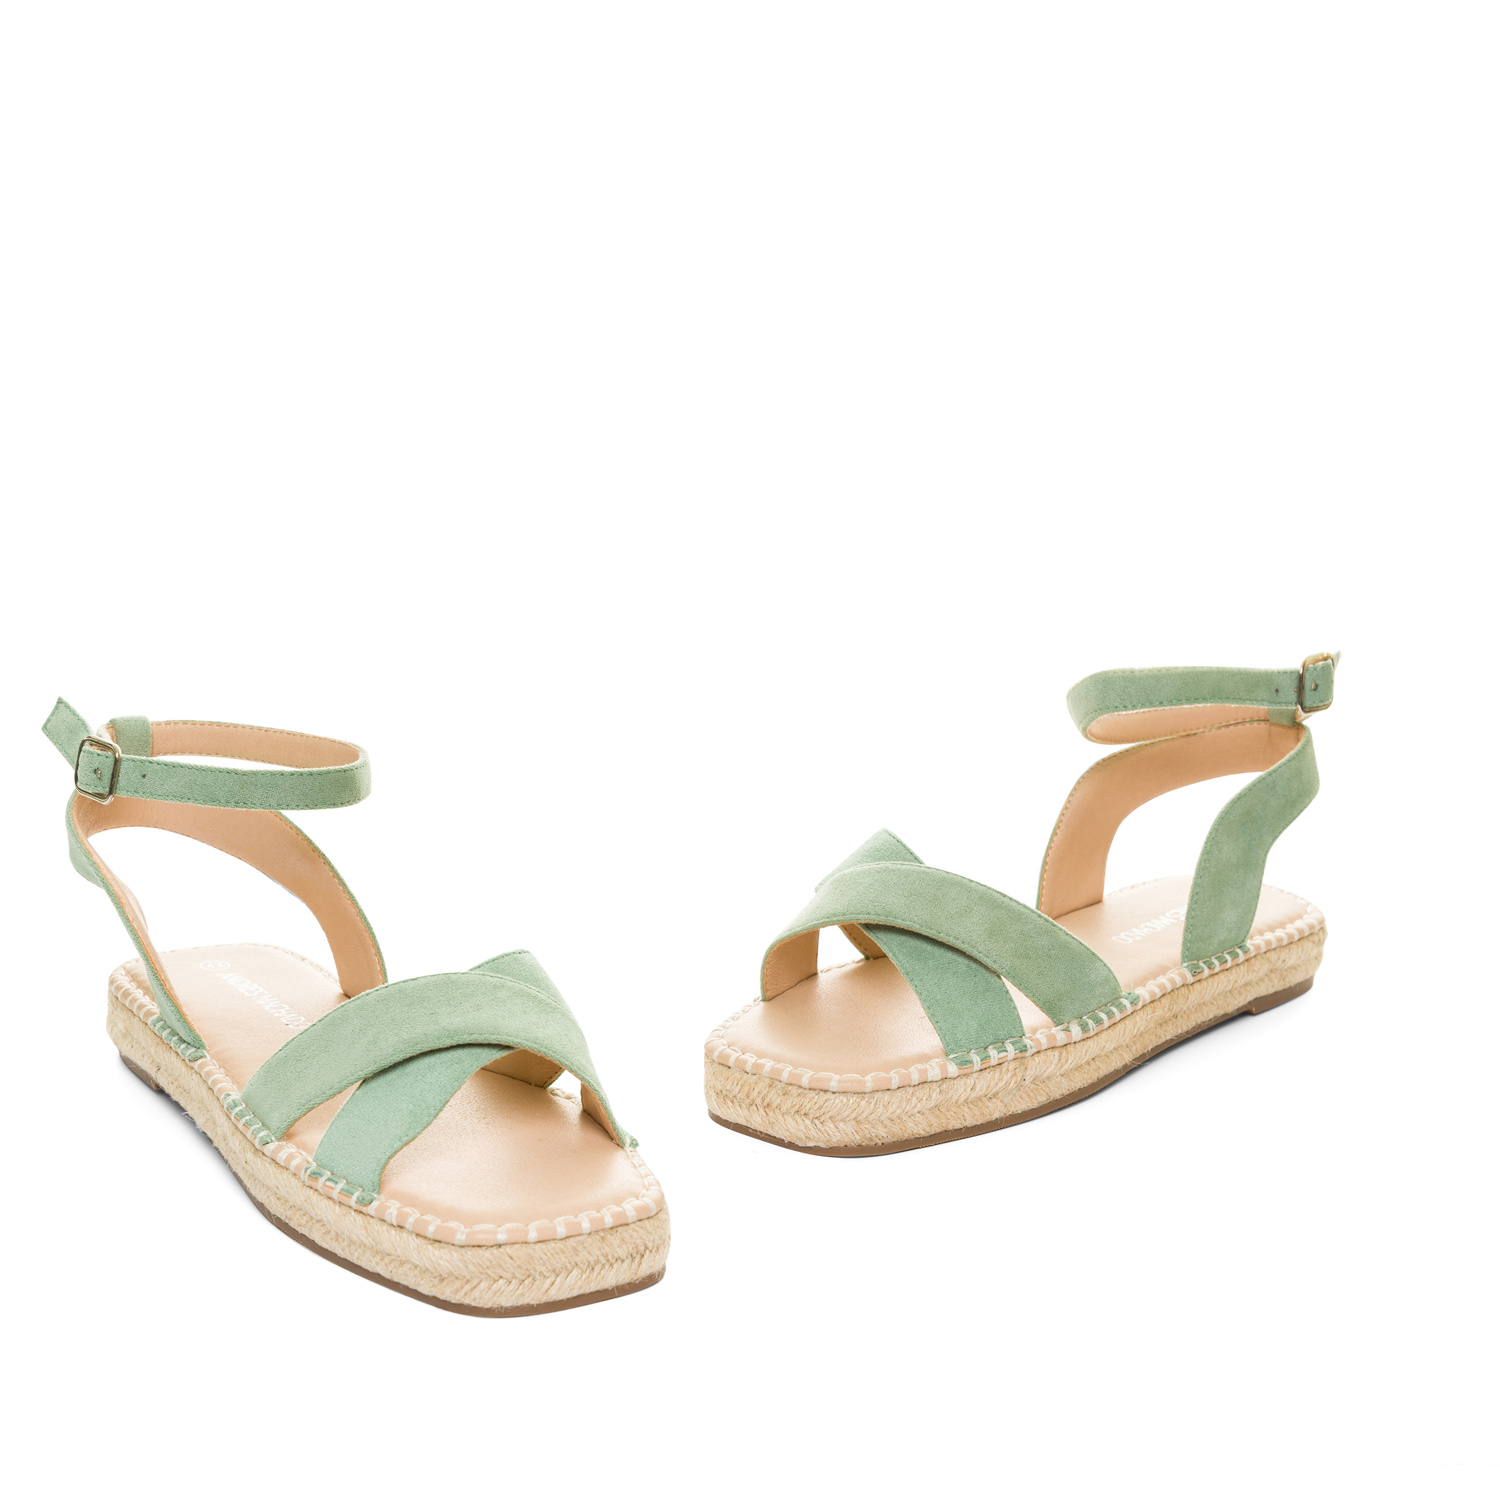 Mint faux suede sandals with jute wedge 